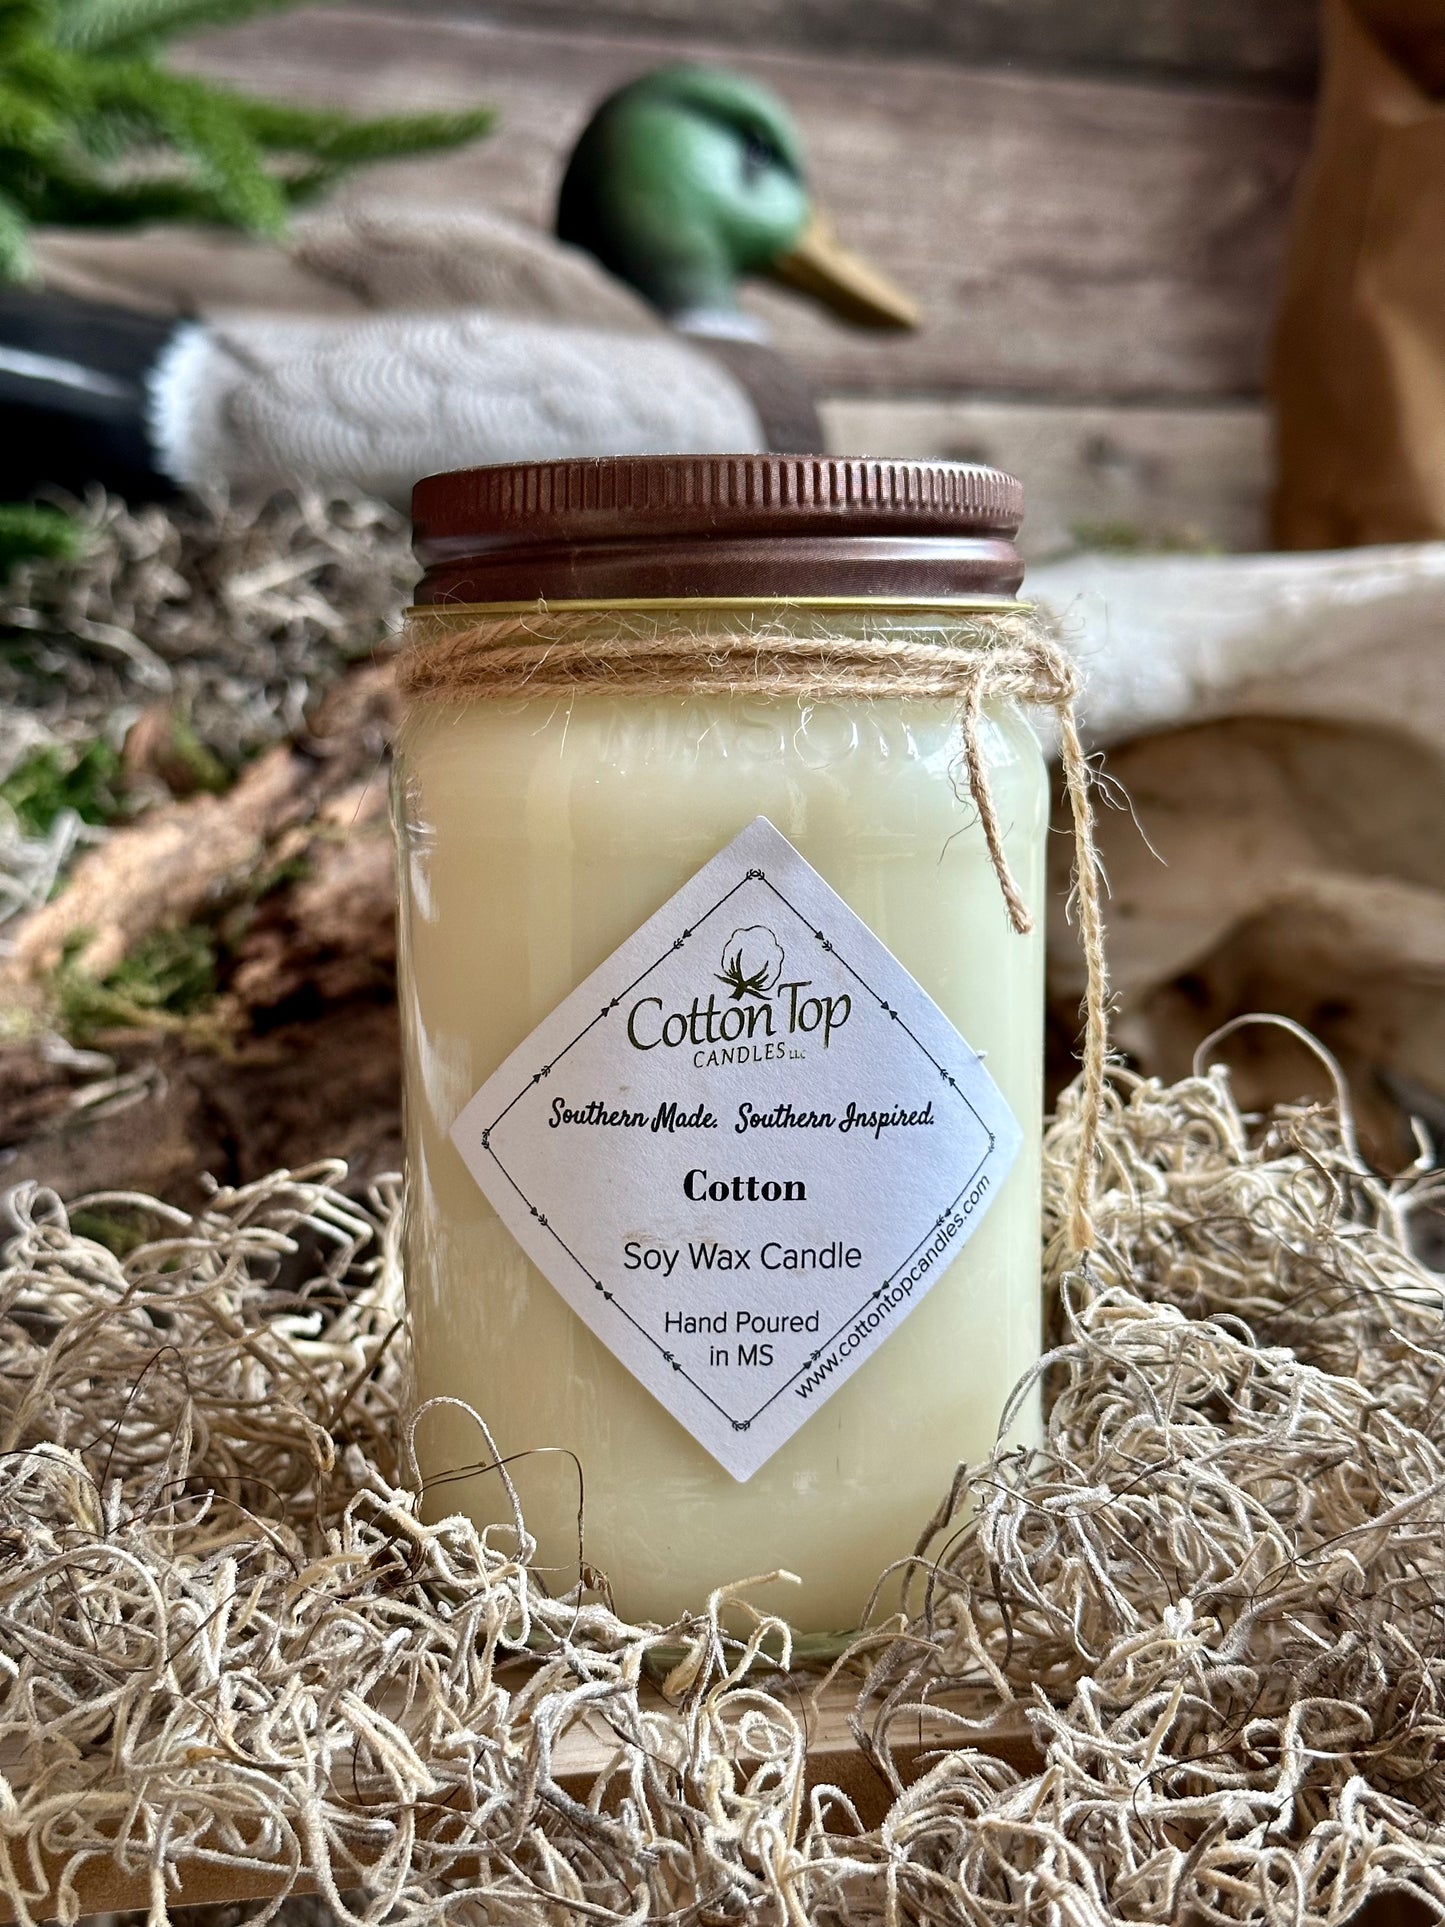 Cotton Top Candle: Large